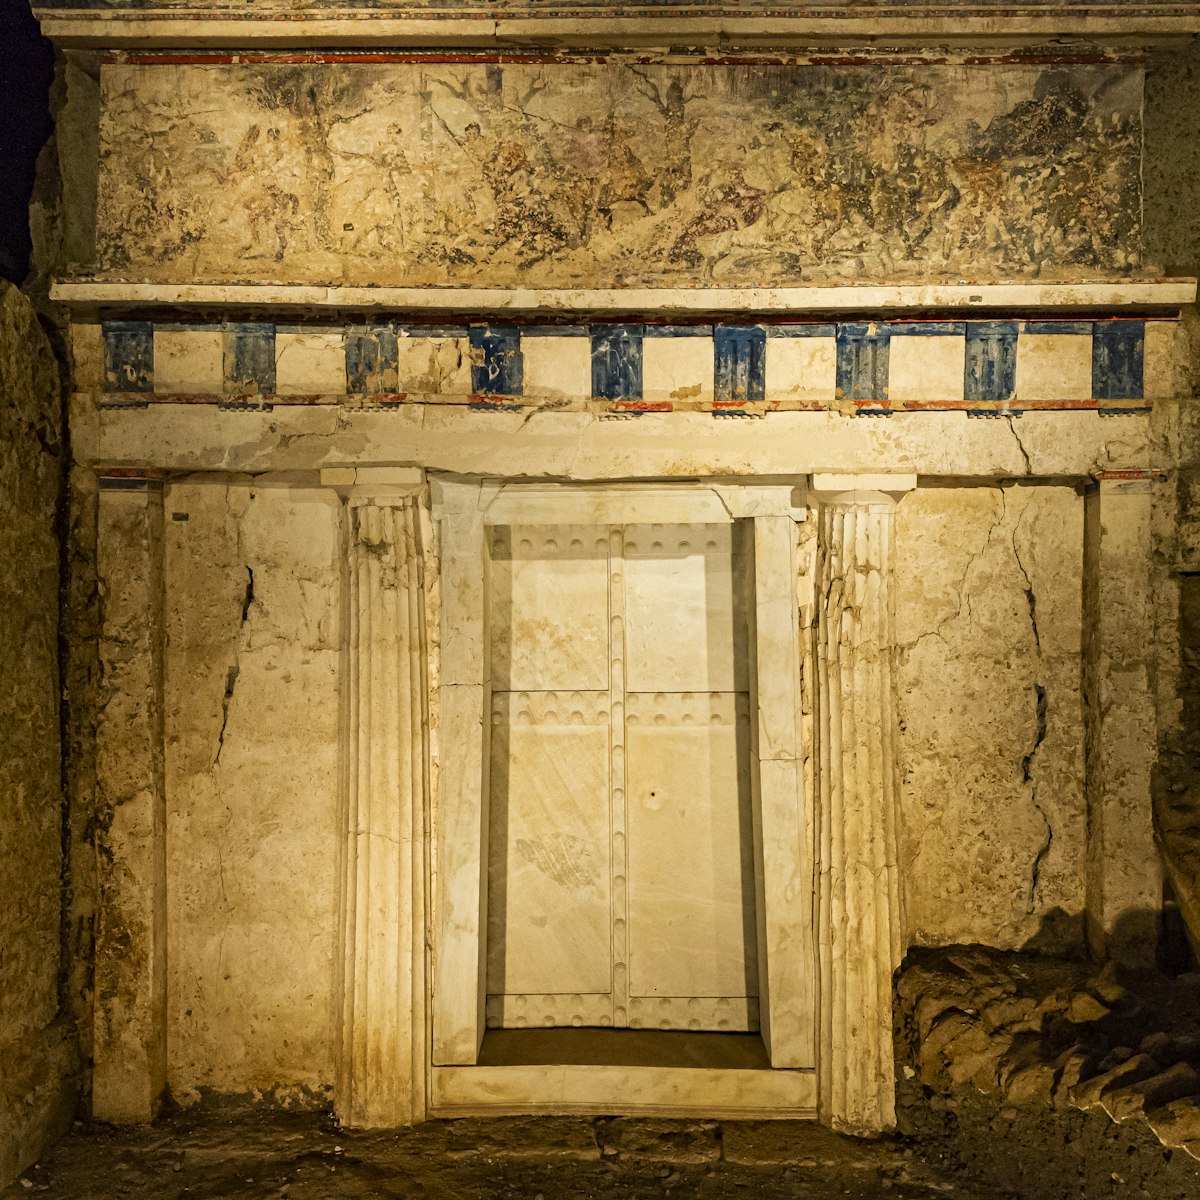 1303580786
architectural, artistic, creative, mural painting, mural paintings, murals, nighttime, no one, no person, nobody, outdoor, outside, paintings, past, stone, tomb of phillip ii, vergina, worn